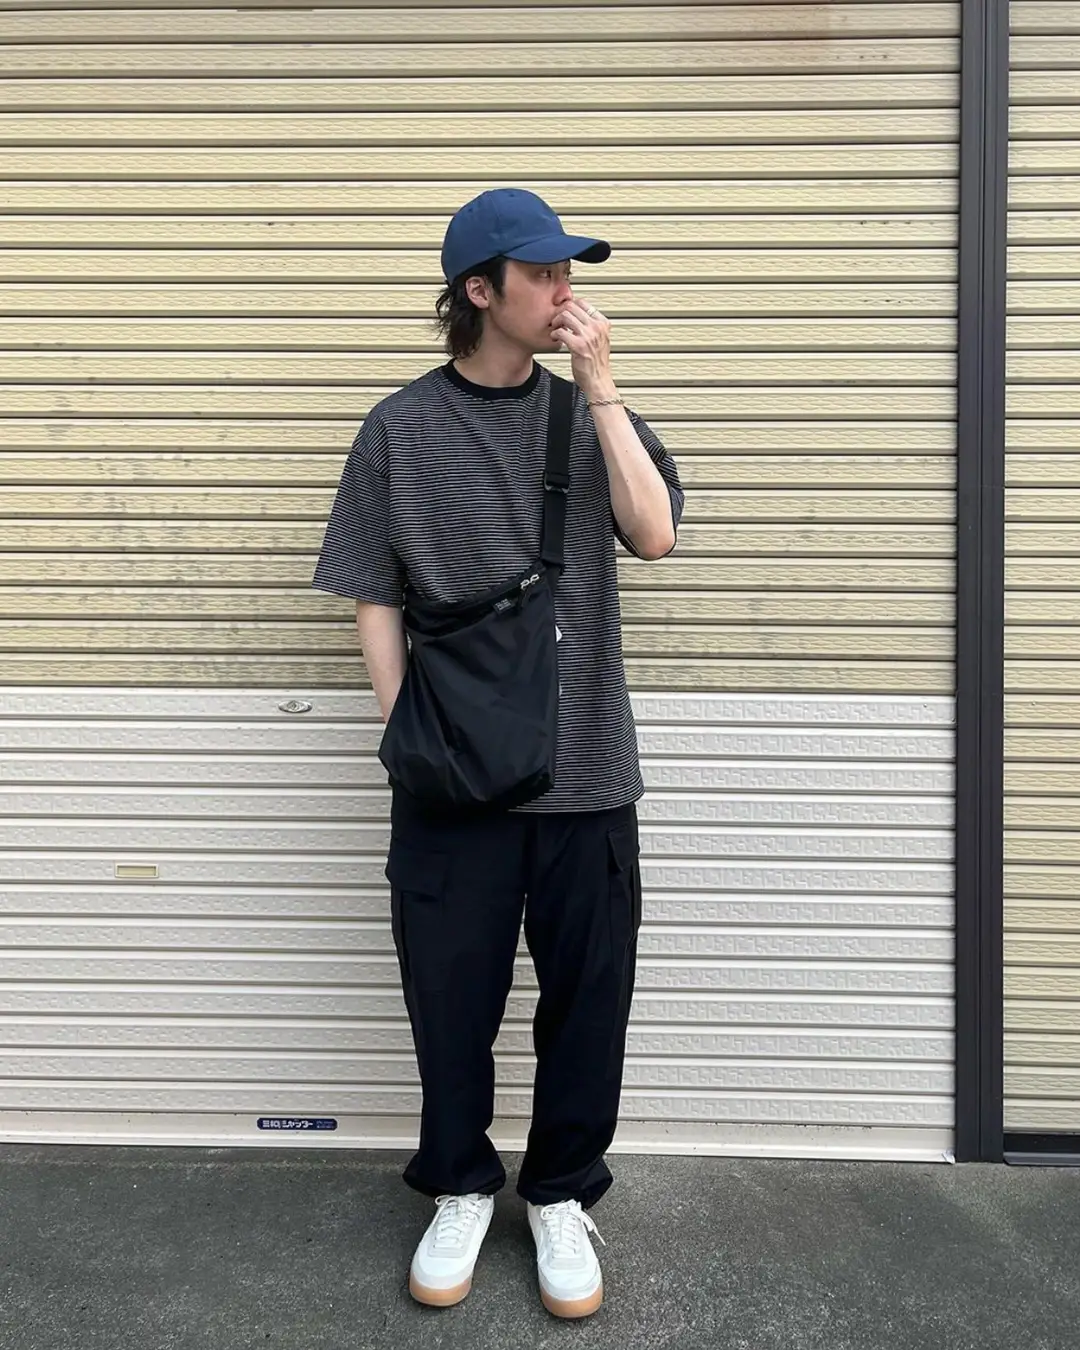 CITY BOY Summer Styling   Gallery posted by メゾン七つ道具